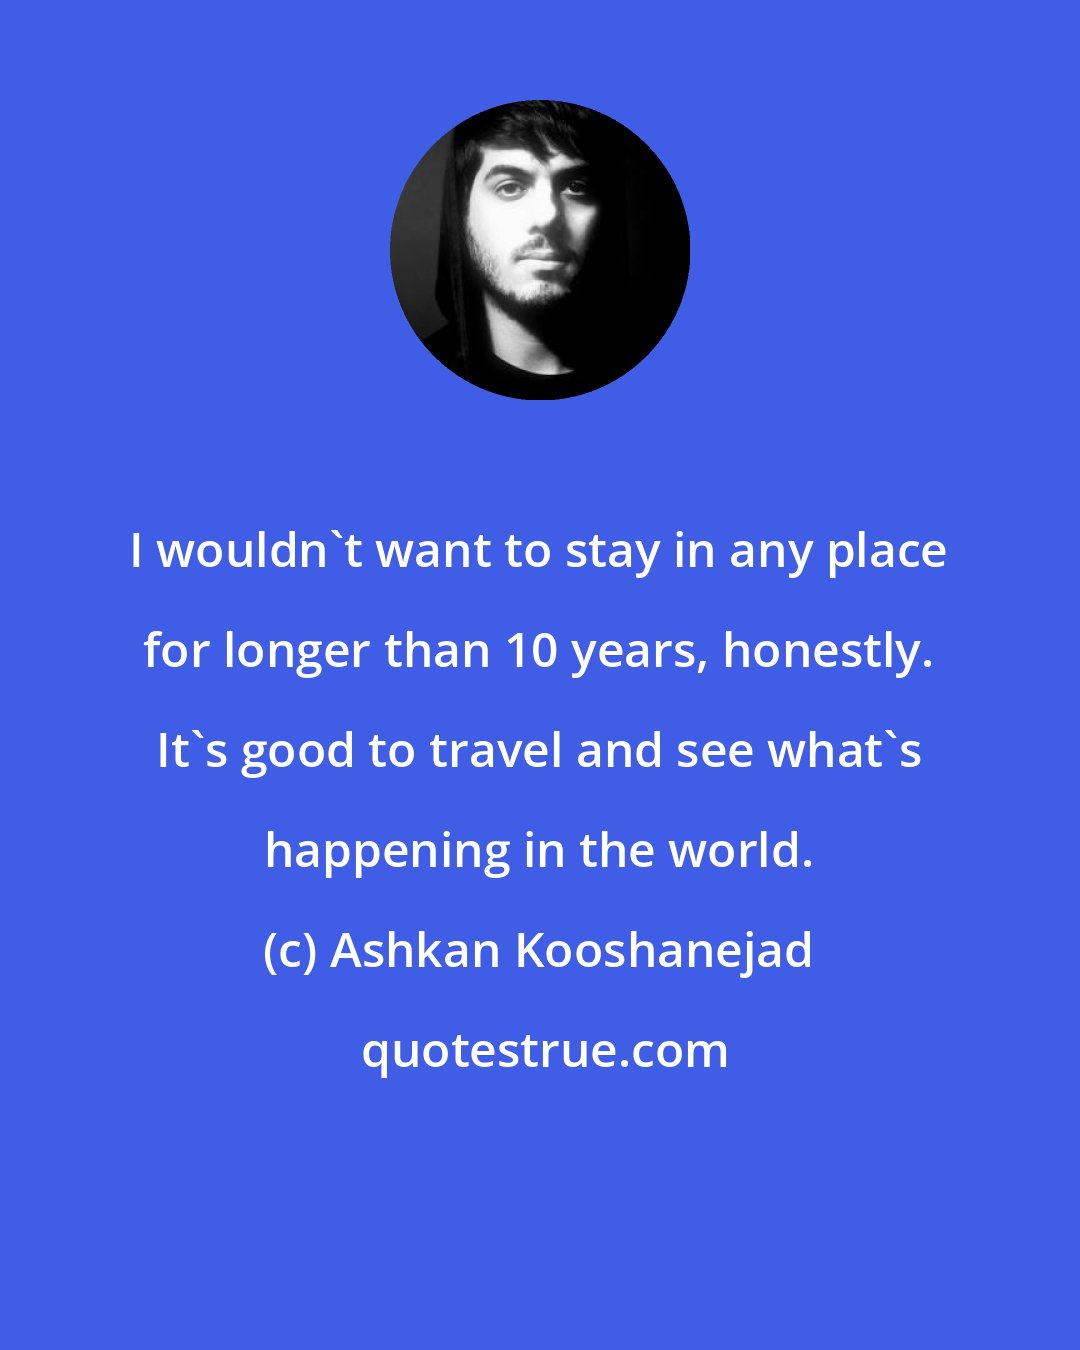 Ashkan Kooshanejad: I wouldn't want to stay in any place for longer than 10 years, honestly. It's good to travel and see what's happening in the world.